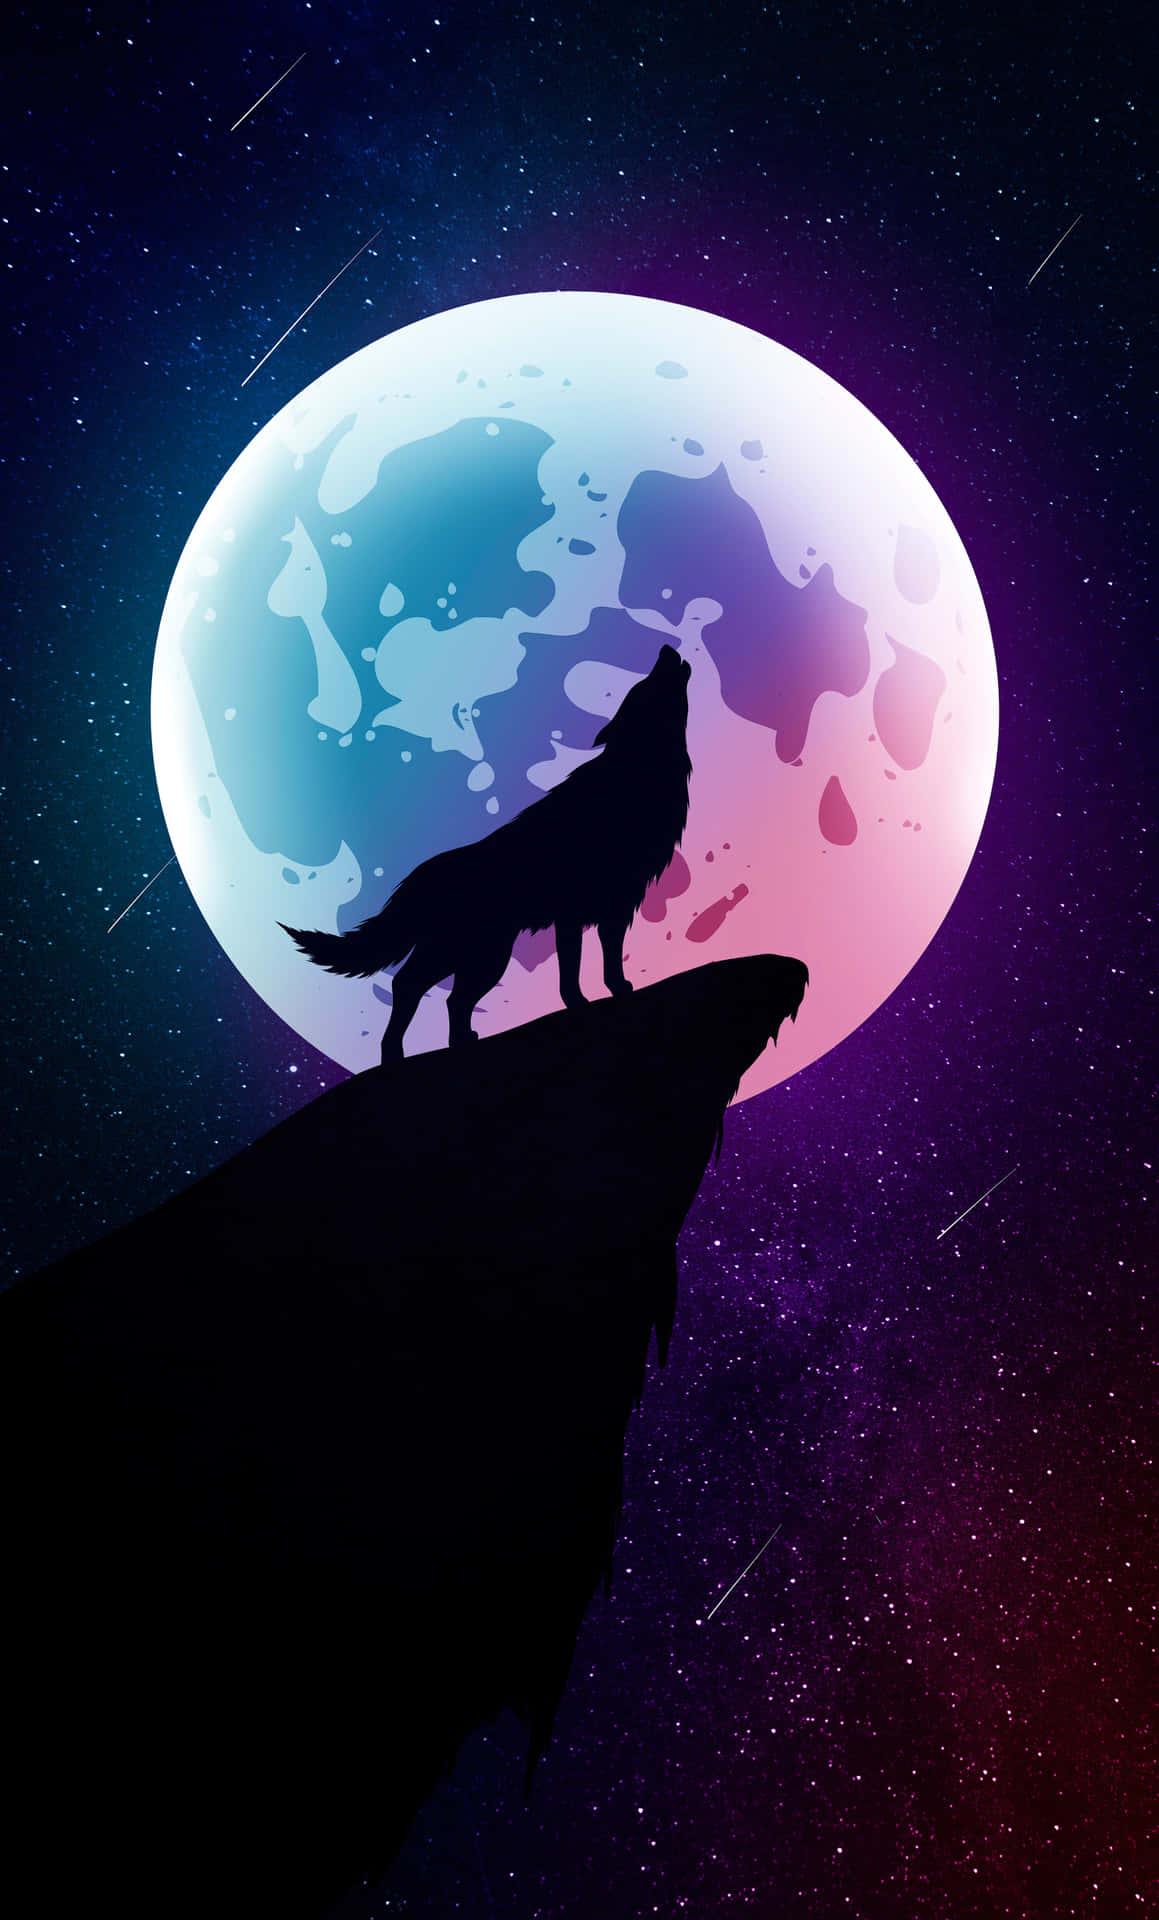 Free Wolf Moon Wallpaper Downloads, [100+] Wolf Moon Wallpapers for FREE |  